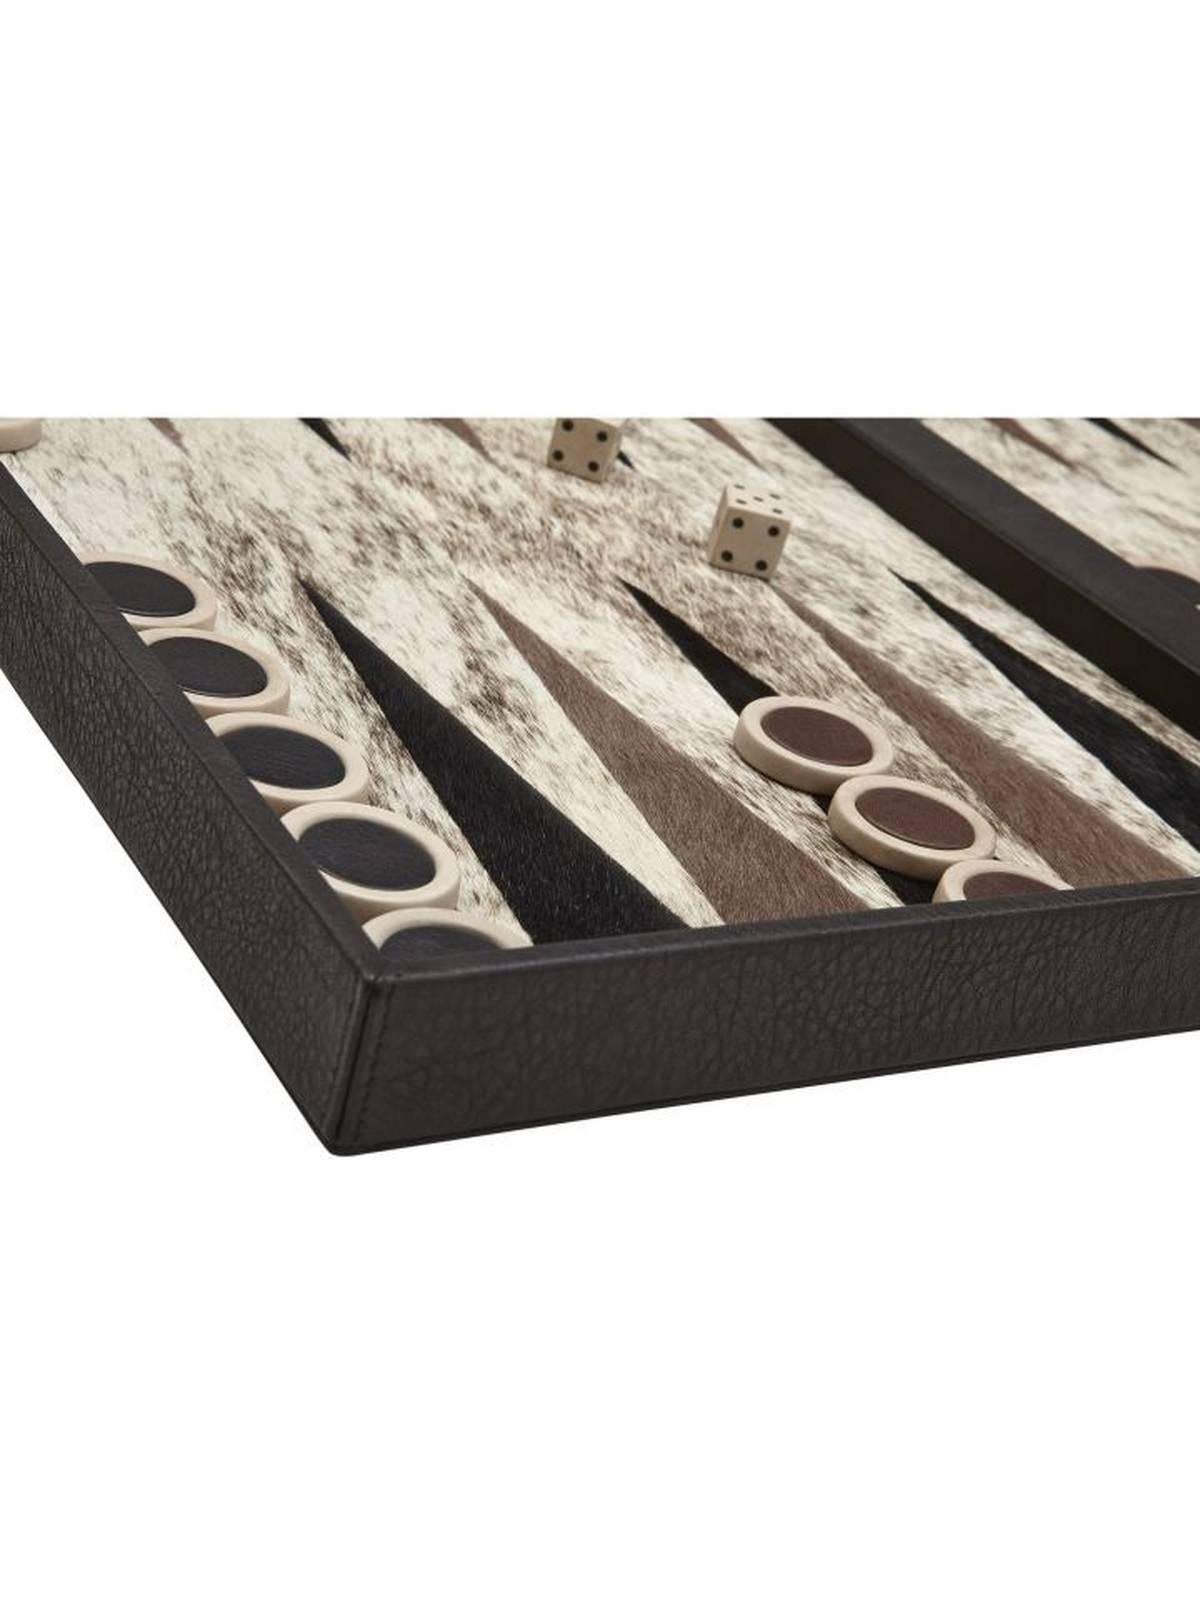 Handmade backgammon set crafted of black leather and grey, caramel and black cowhide. Paired with ceramic chips which are accented on top with mocha cowhide. A functional game and chic accent. Made in France.
  